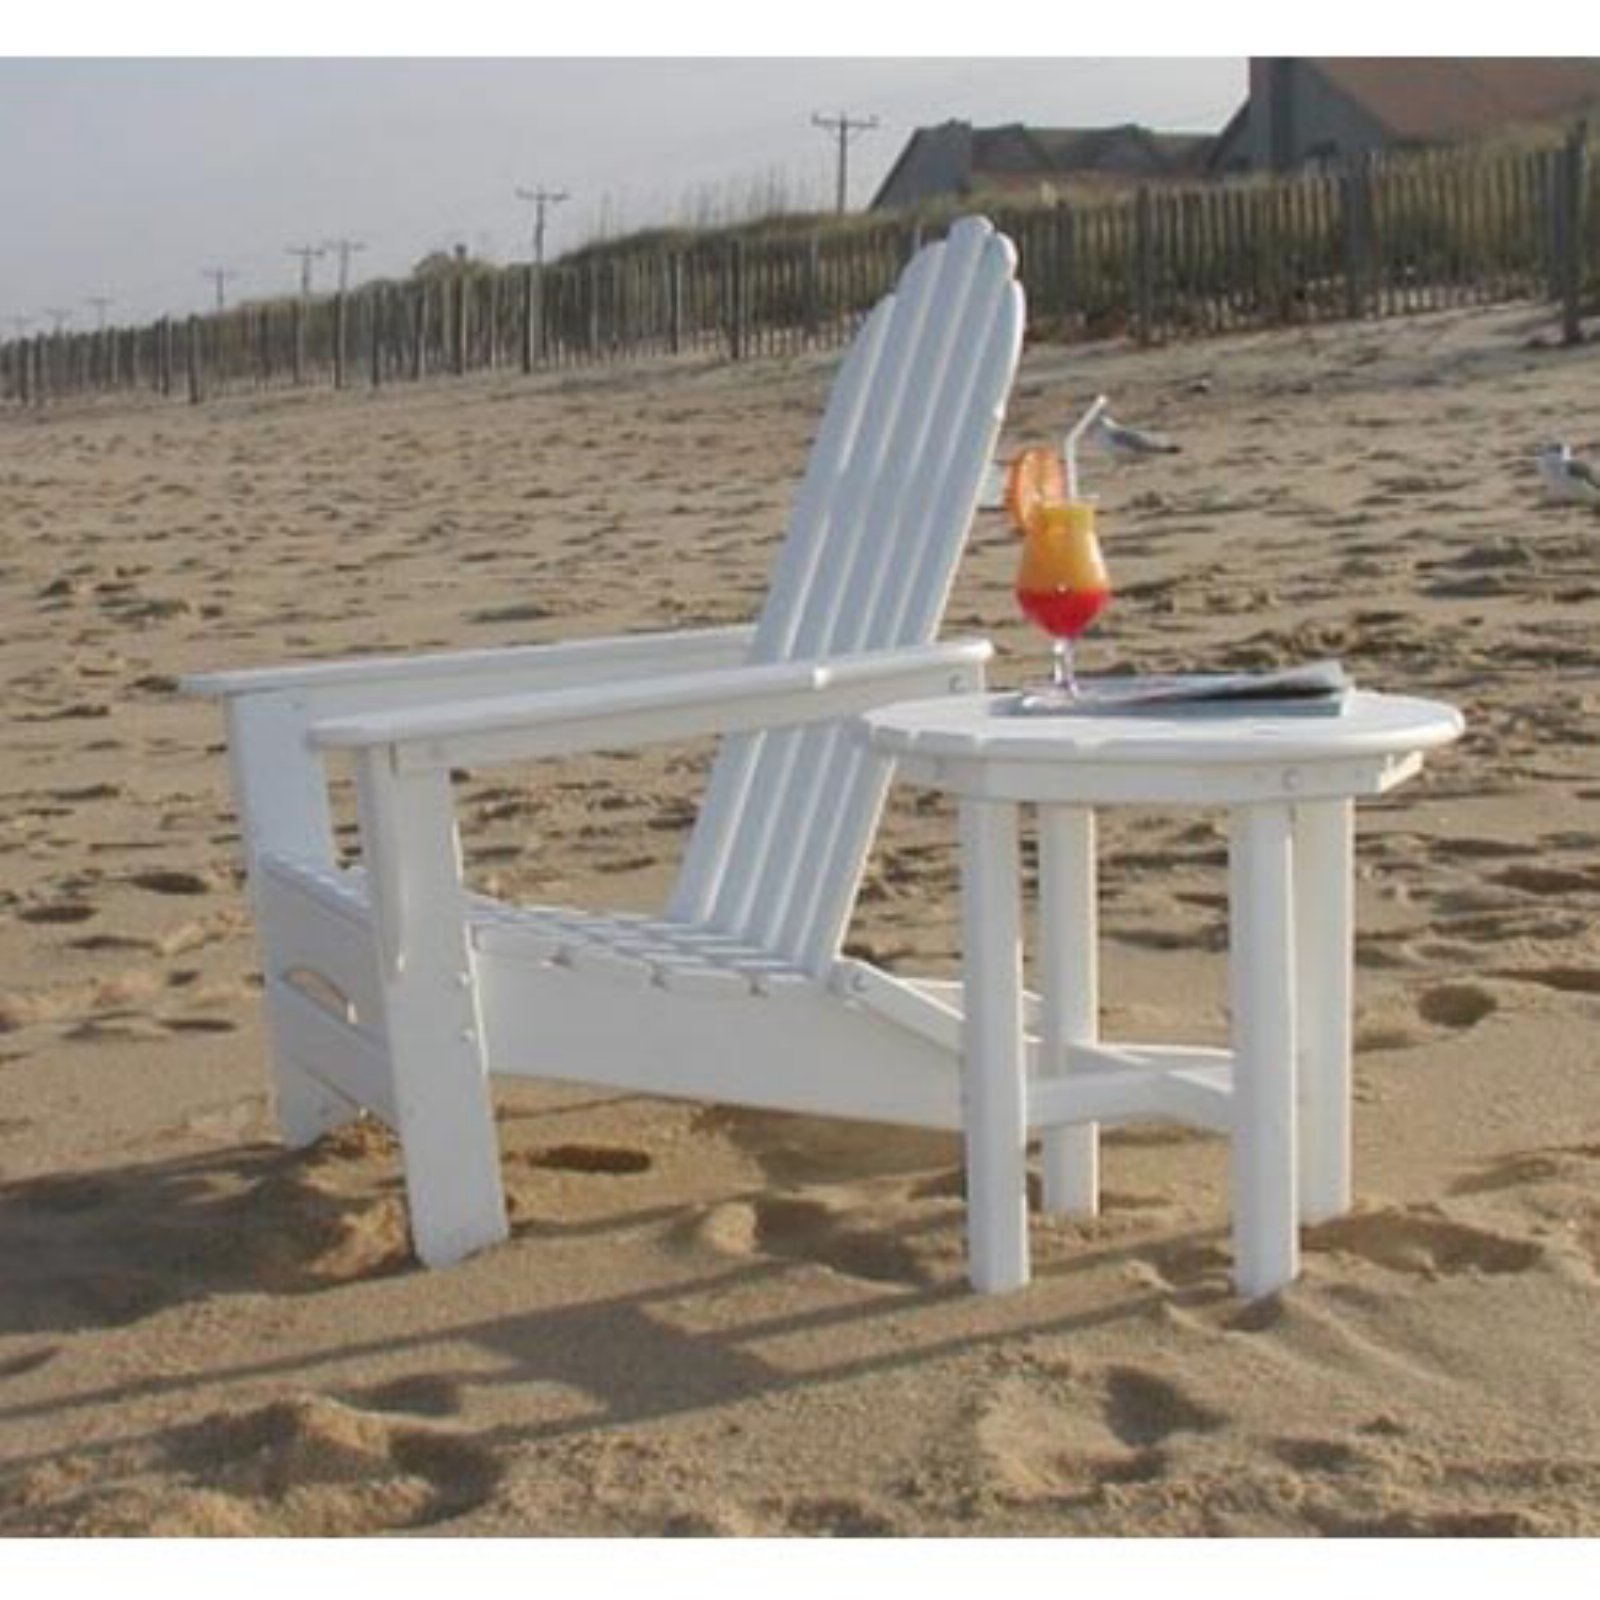 POLYWOOD&reg; Classic Recycled Plastic Foldable Adirondack Chair - image 3 of 11